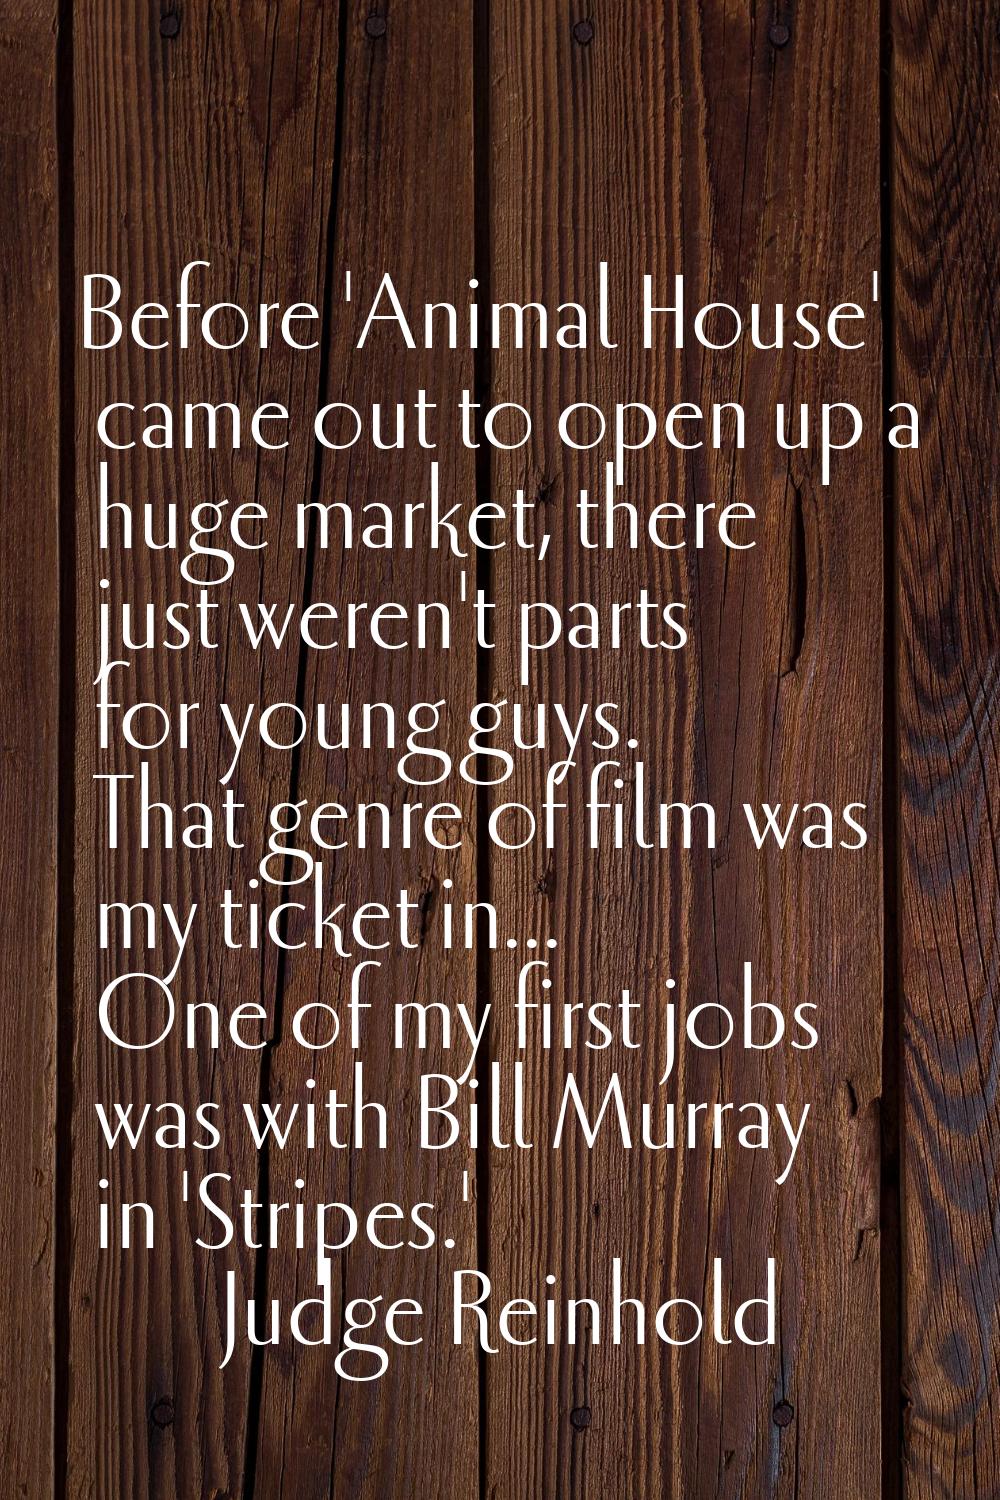 Before 'Animal House' came out to open up a huge market, there just weren't parts for young guys. T